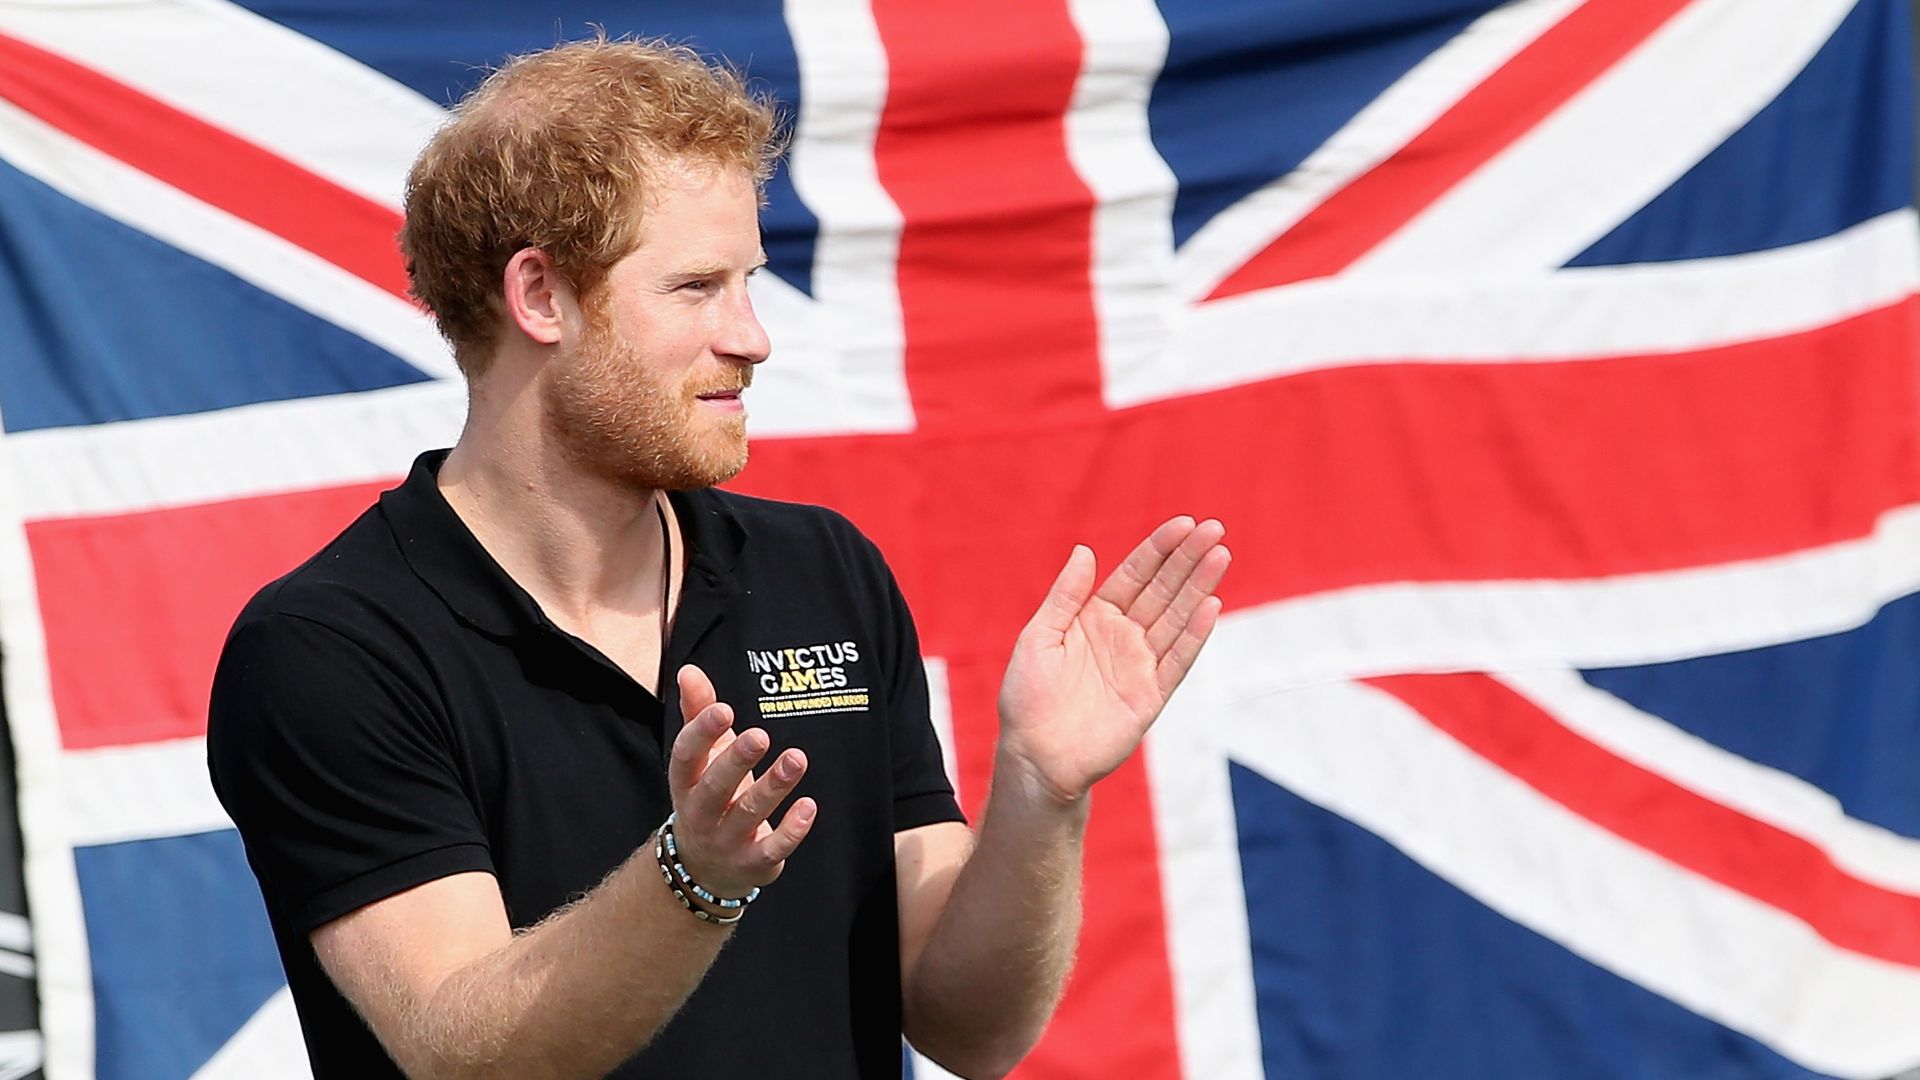 Prince Harry's Invictus Games could make a return to the UK